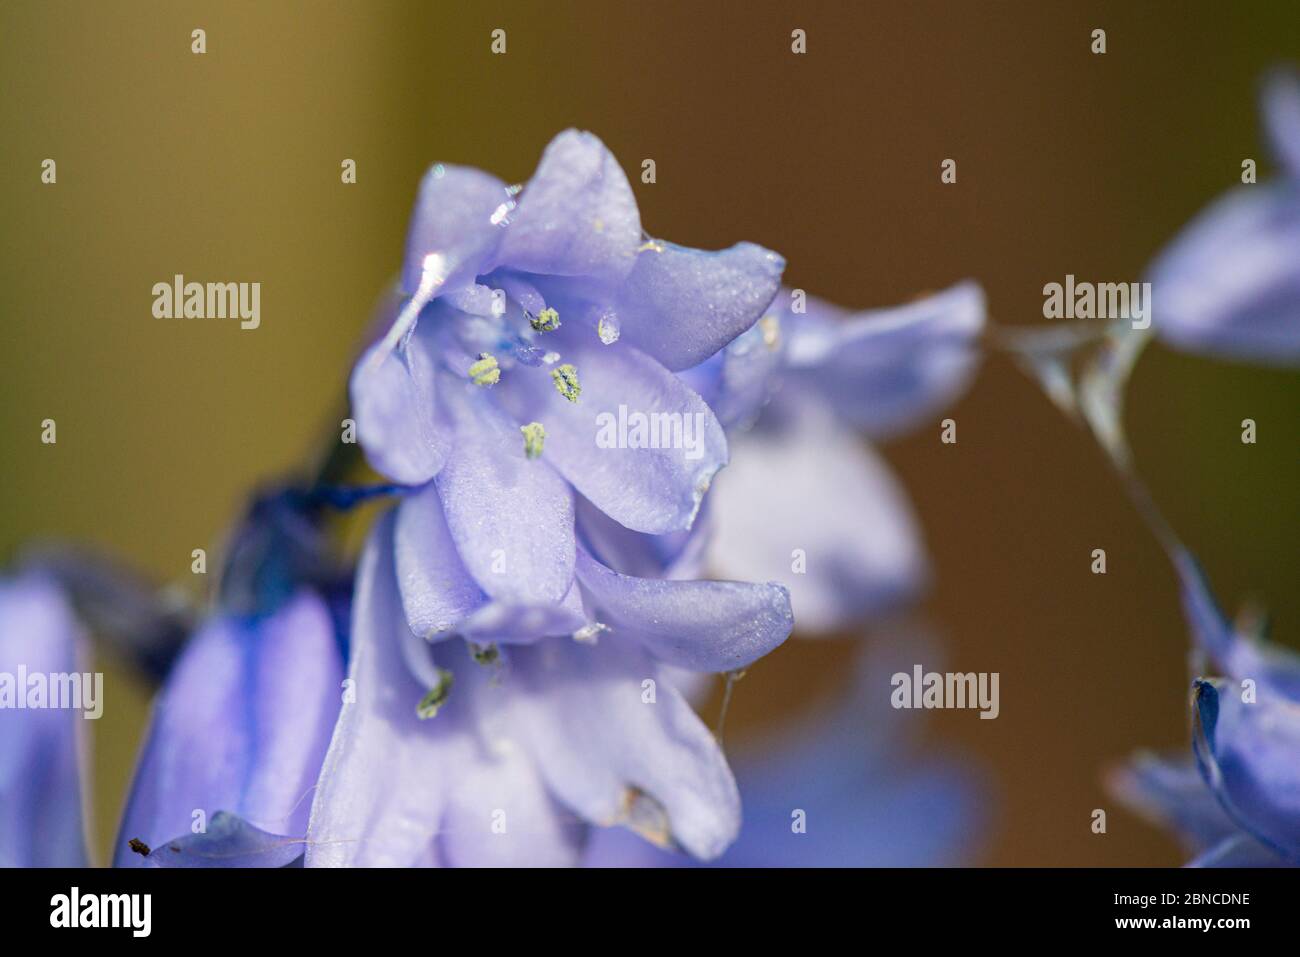 The flowers of a hybrid bluebell (Hyacinthoides x massartiana) a cross between common bluebell (H. non-scripta) and the Spanish bluebell (H. hispan) Stock Photo